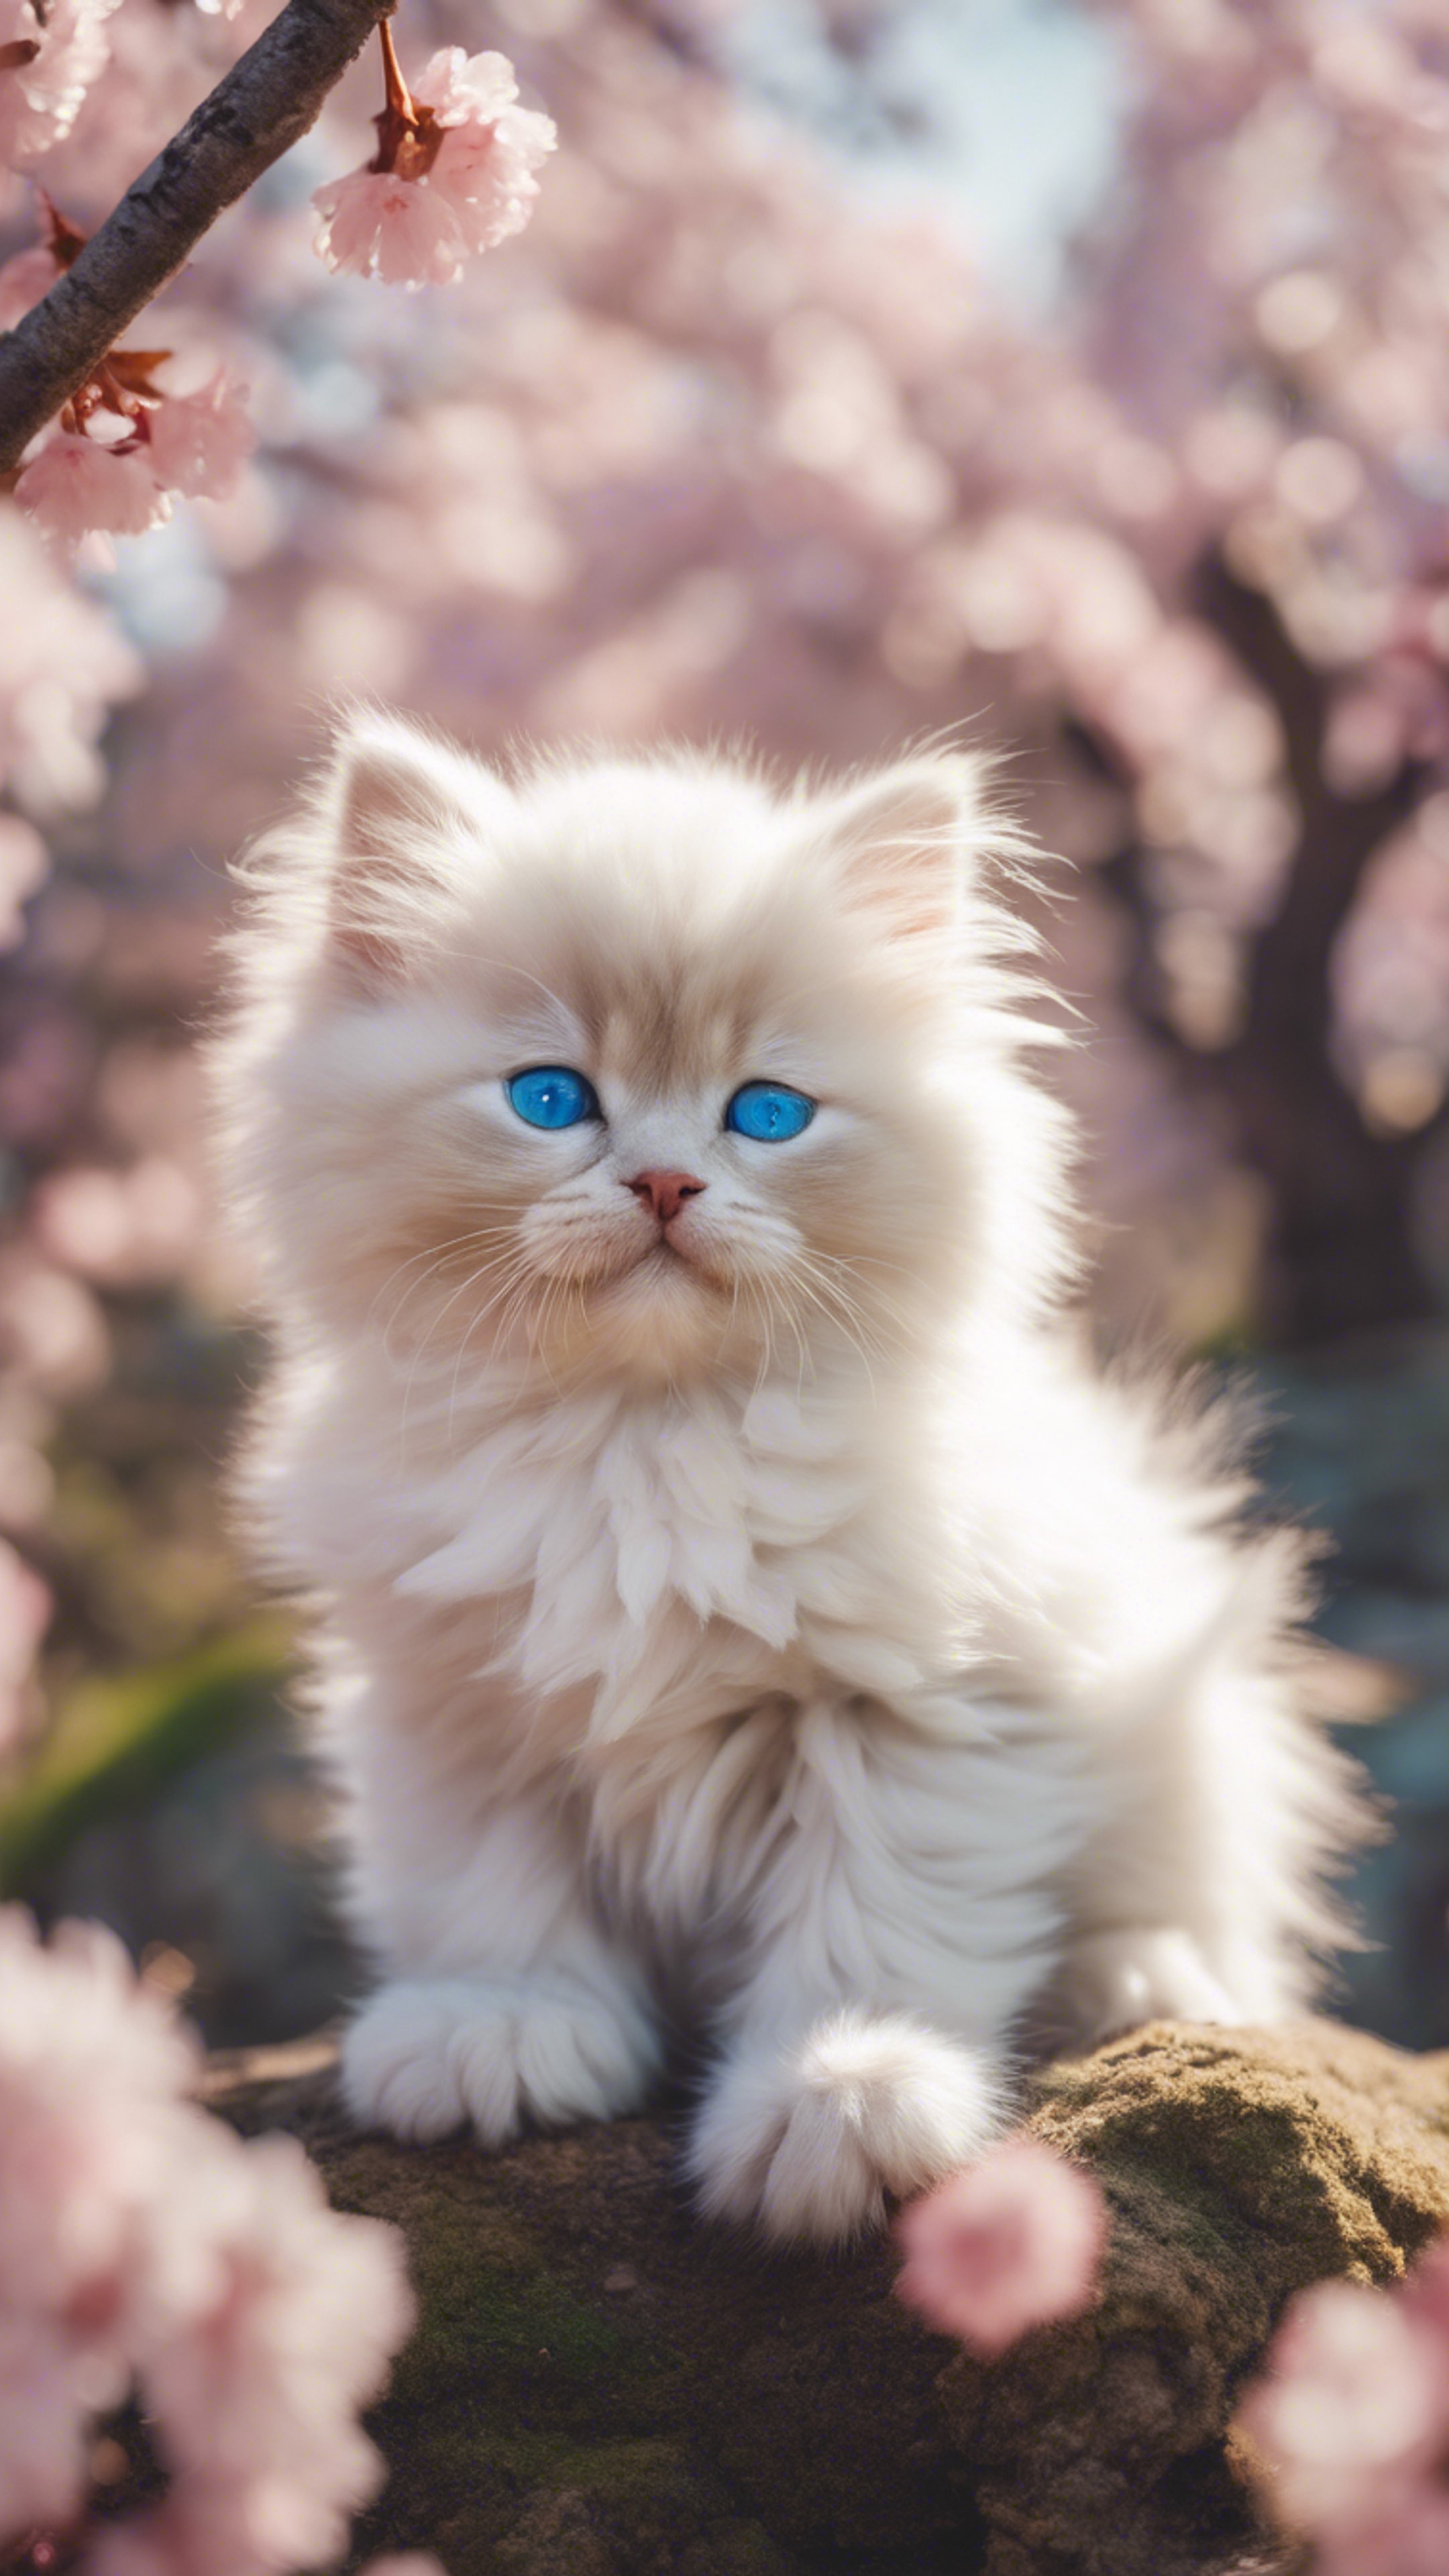 A fluffy Himalayan kitten with blue eyes, blissfully sleeping in a cherry blossom-filled Japanese garden in springtime. Behang[7574b48ca53a4fd7b91a]